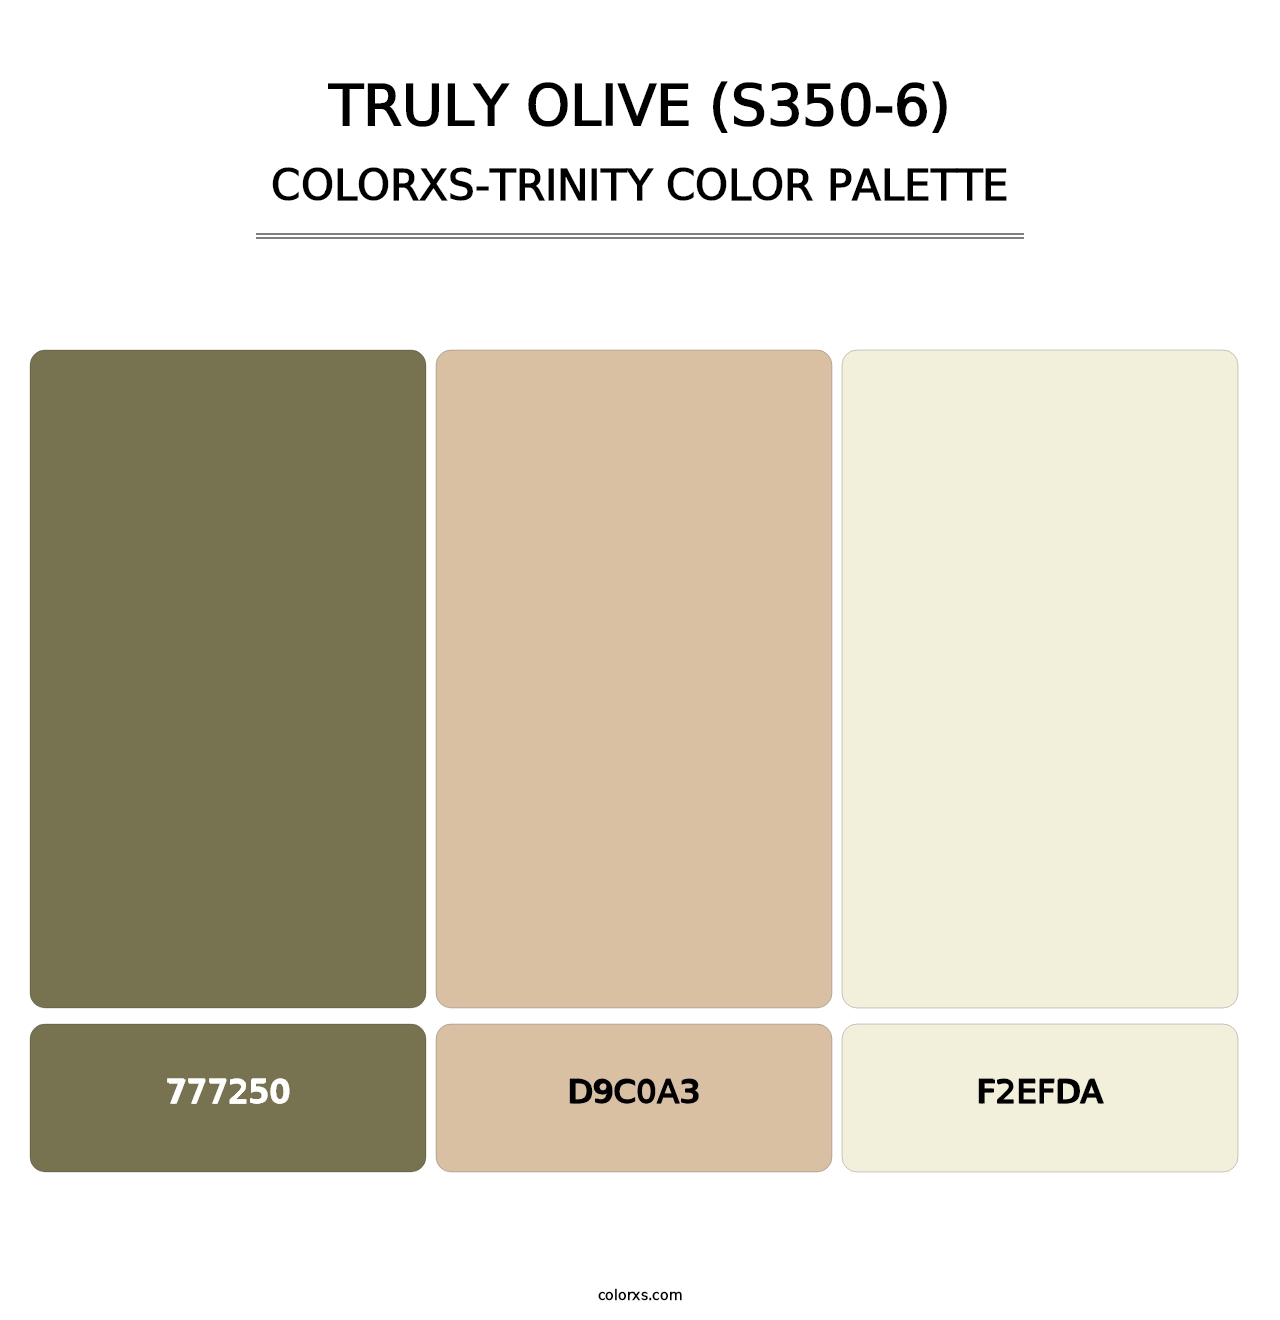 Truly Olive (S350-6) - Colorxs Trinity Palette